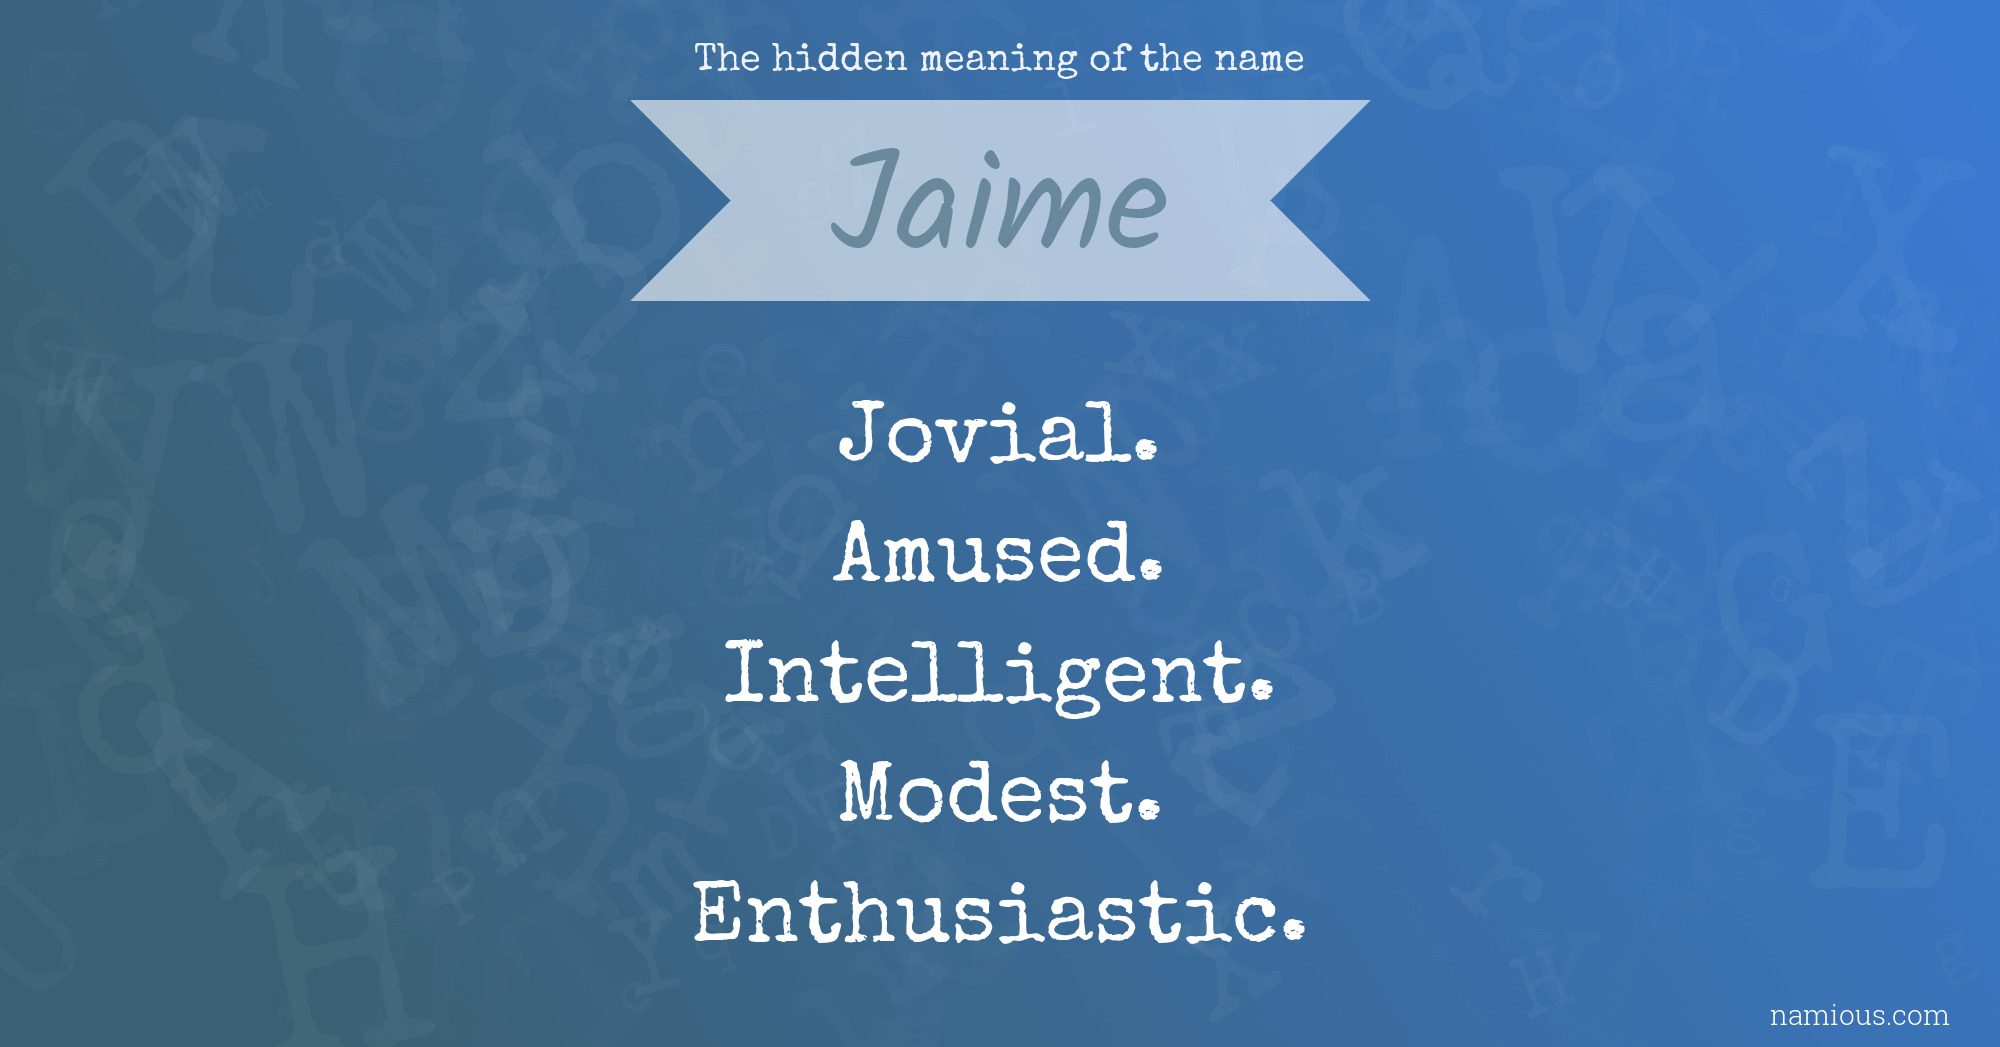 The hidden meaning of the name Jaime